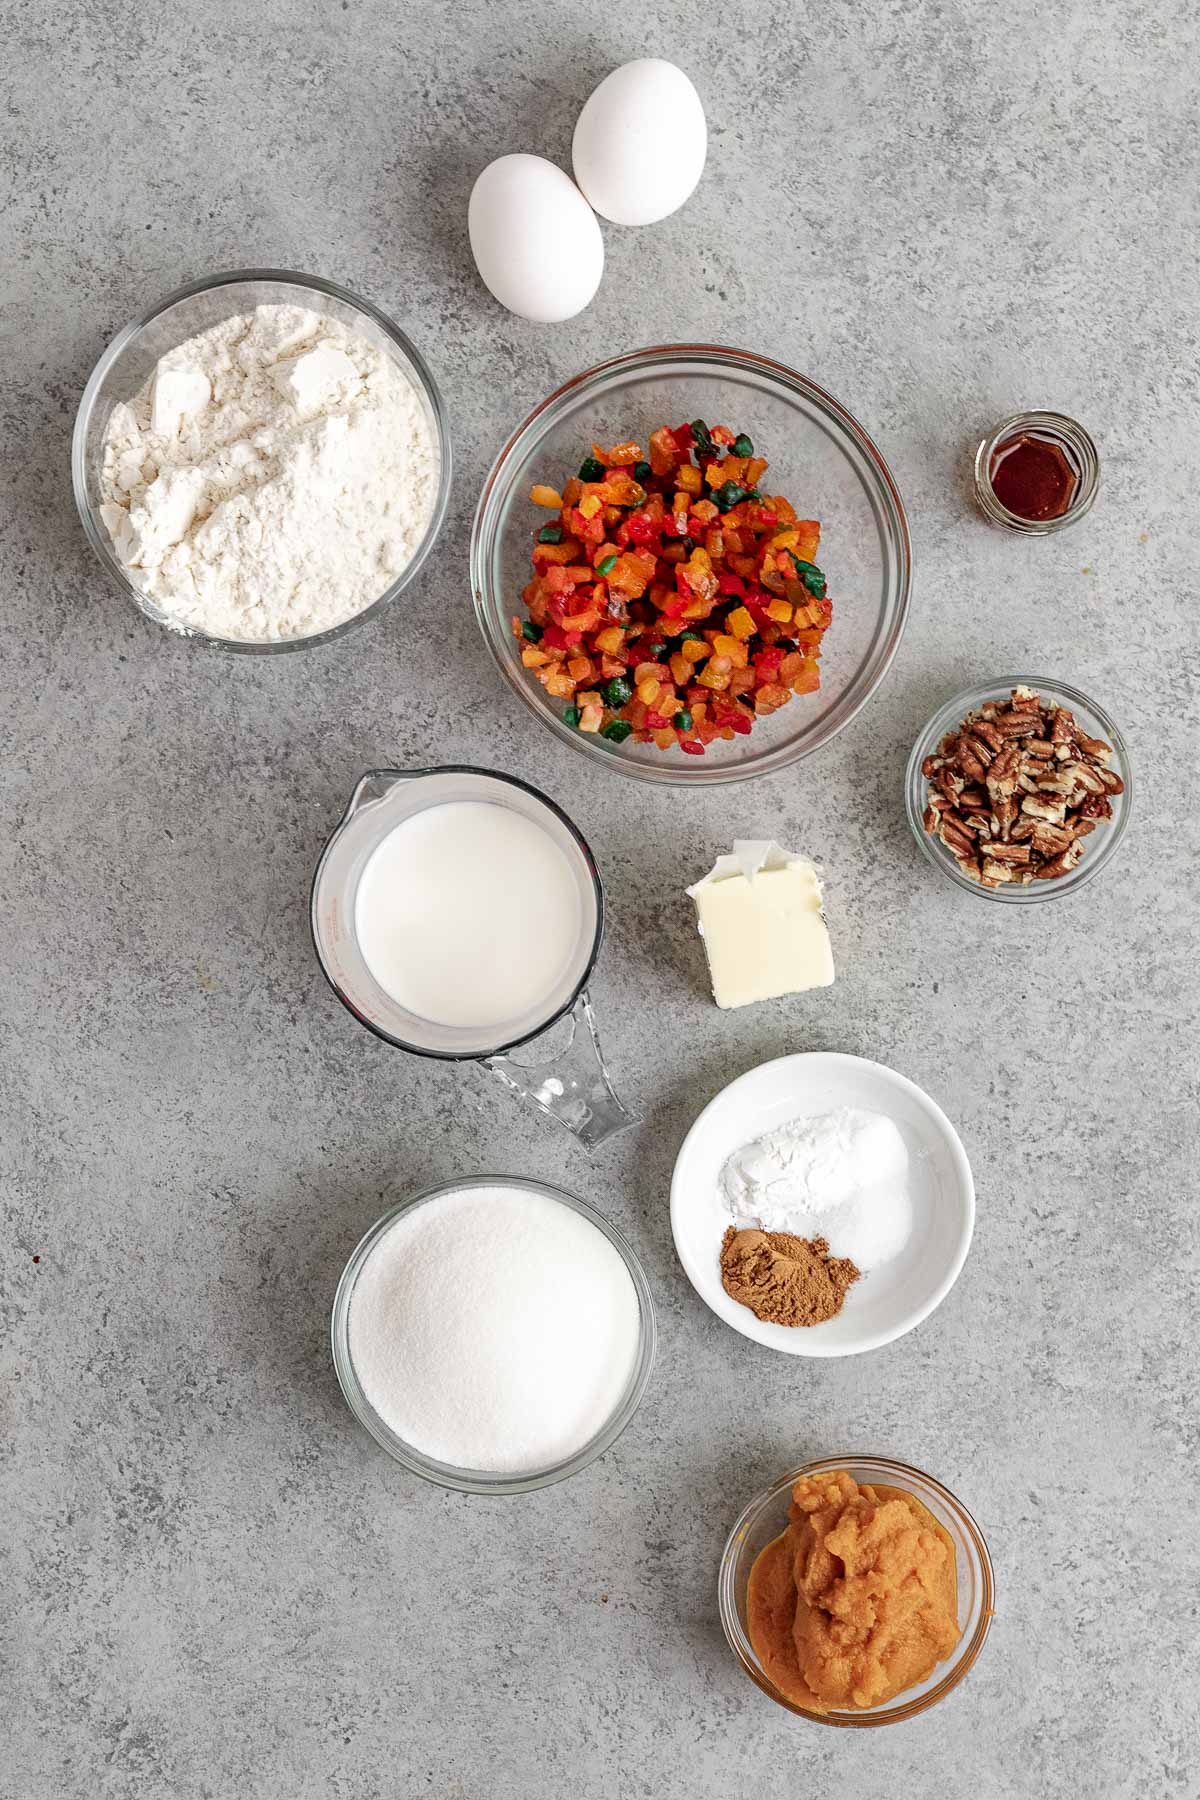 Pumpkin Fruitcake ingredients spread out on counter in separate bowls